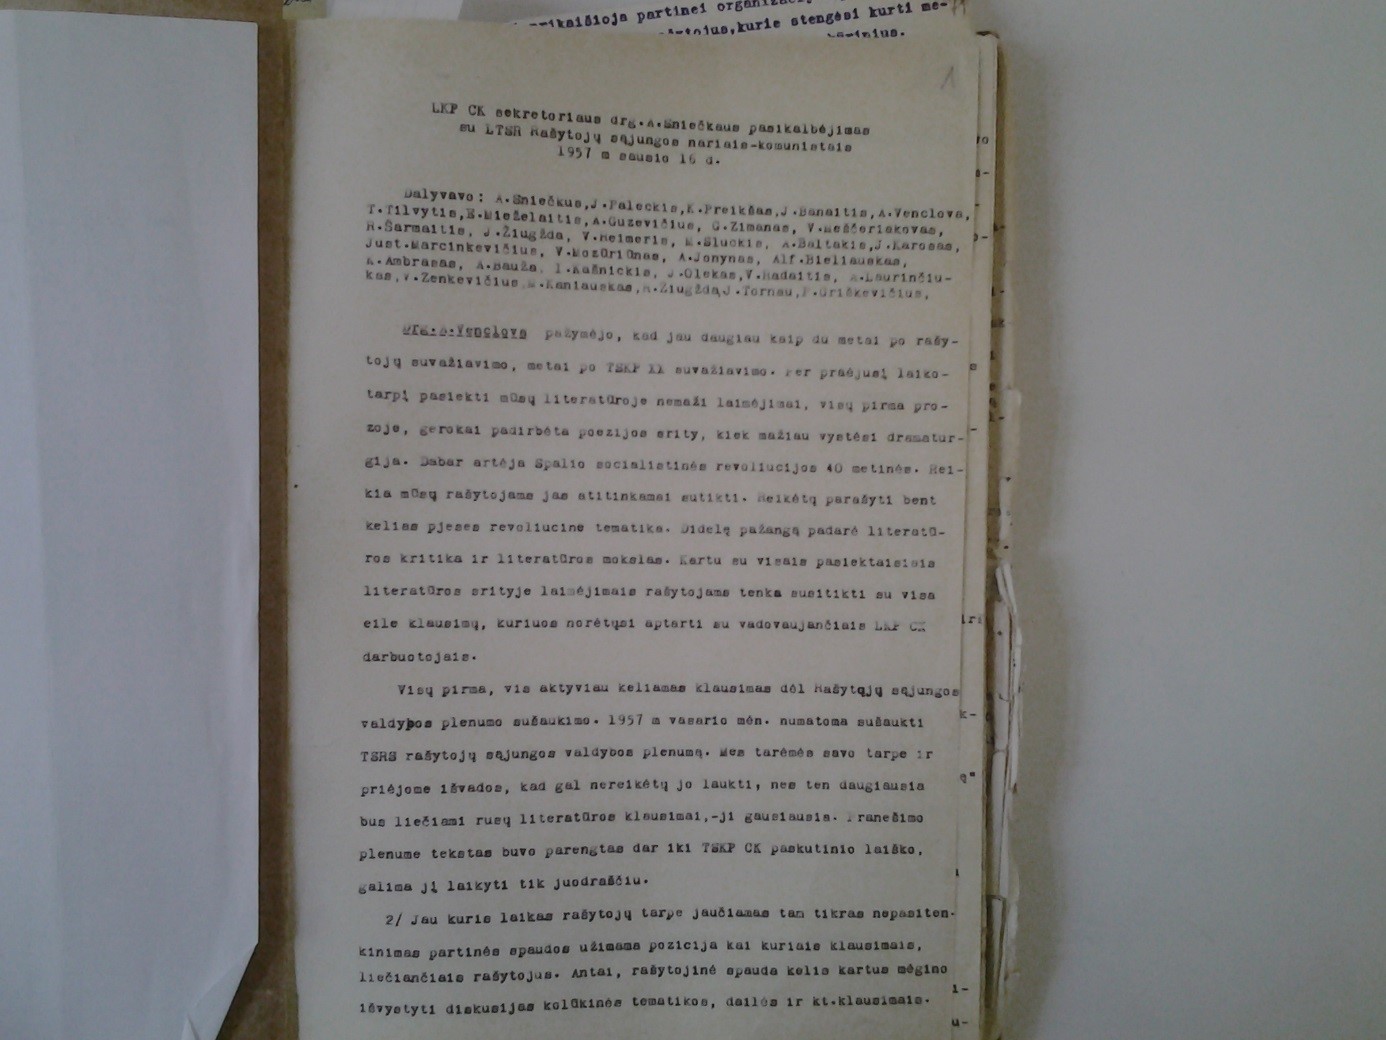 The report of Sniečkus meeting with Lithuanian writers. 1957. Source: Lithuanian Communist party documents archive.